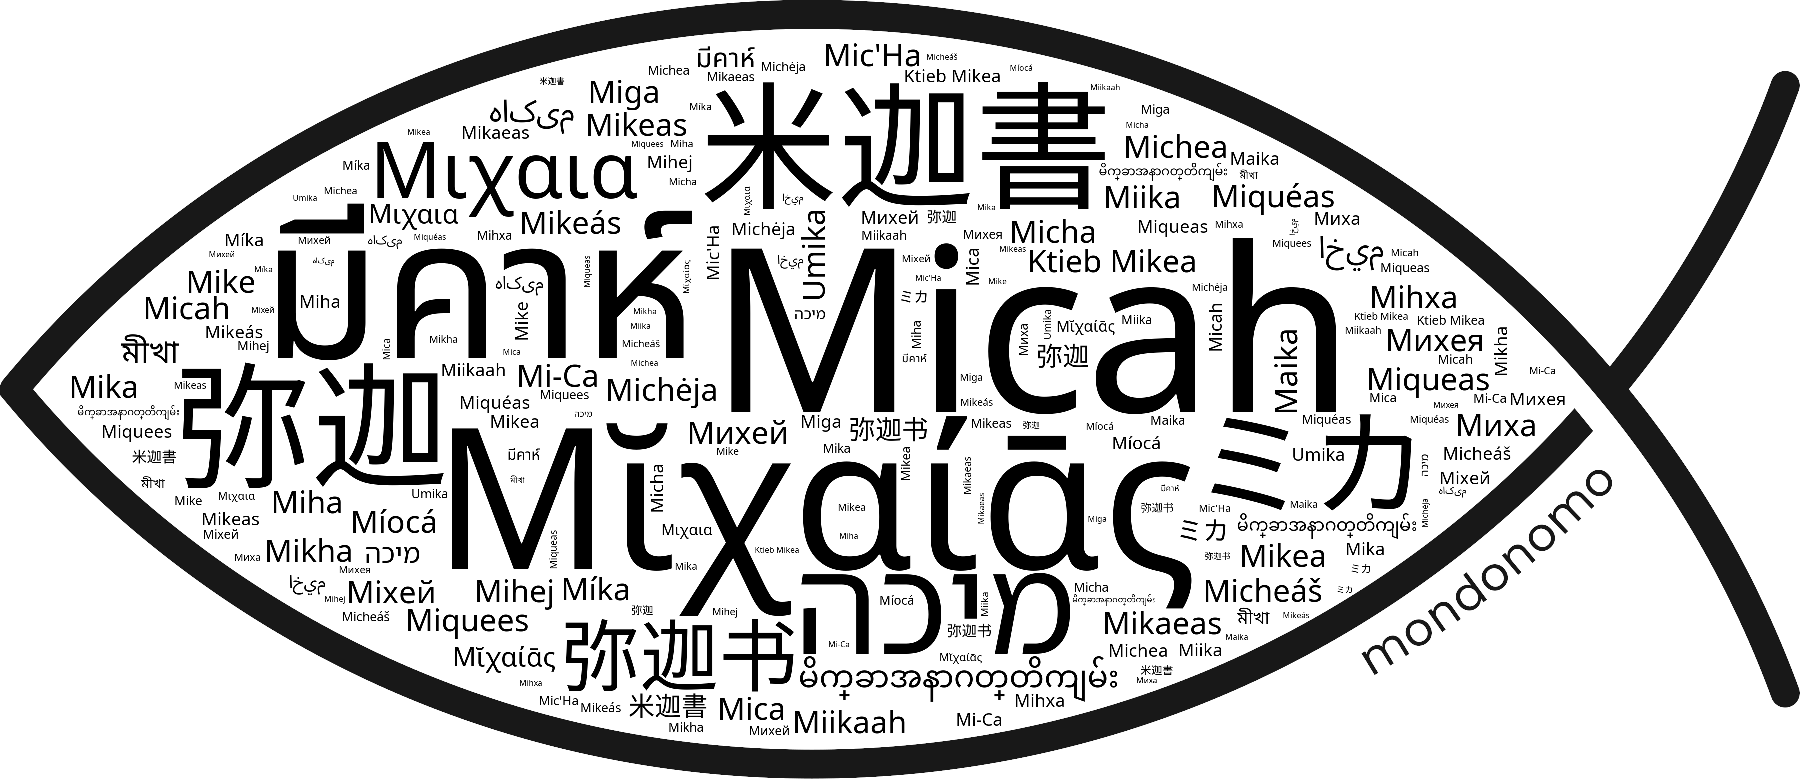 Name Micah in the world's Bibles